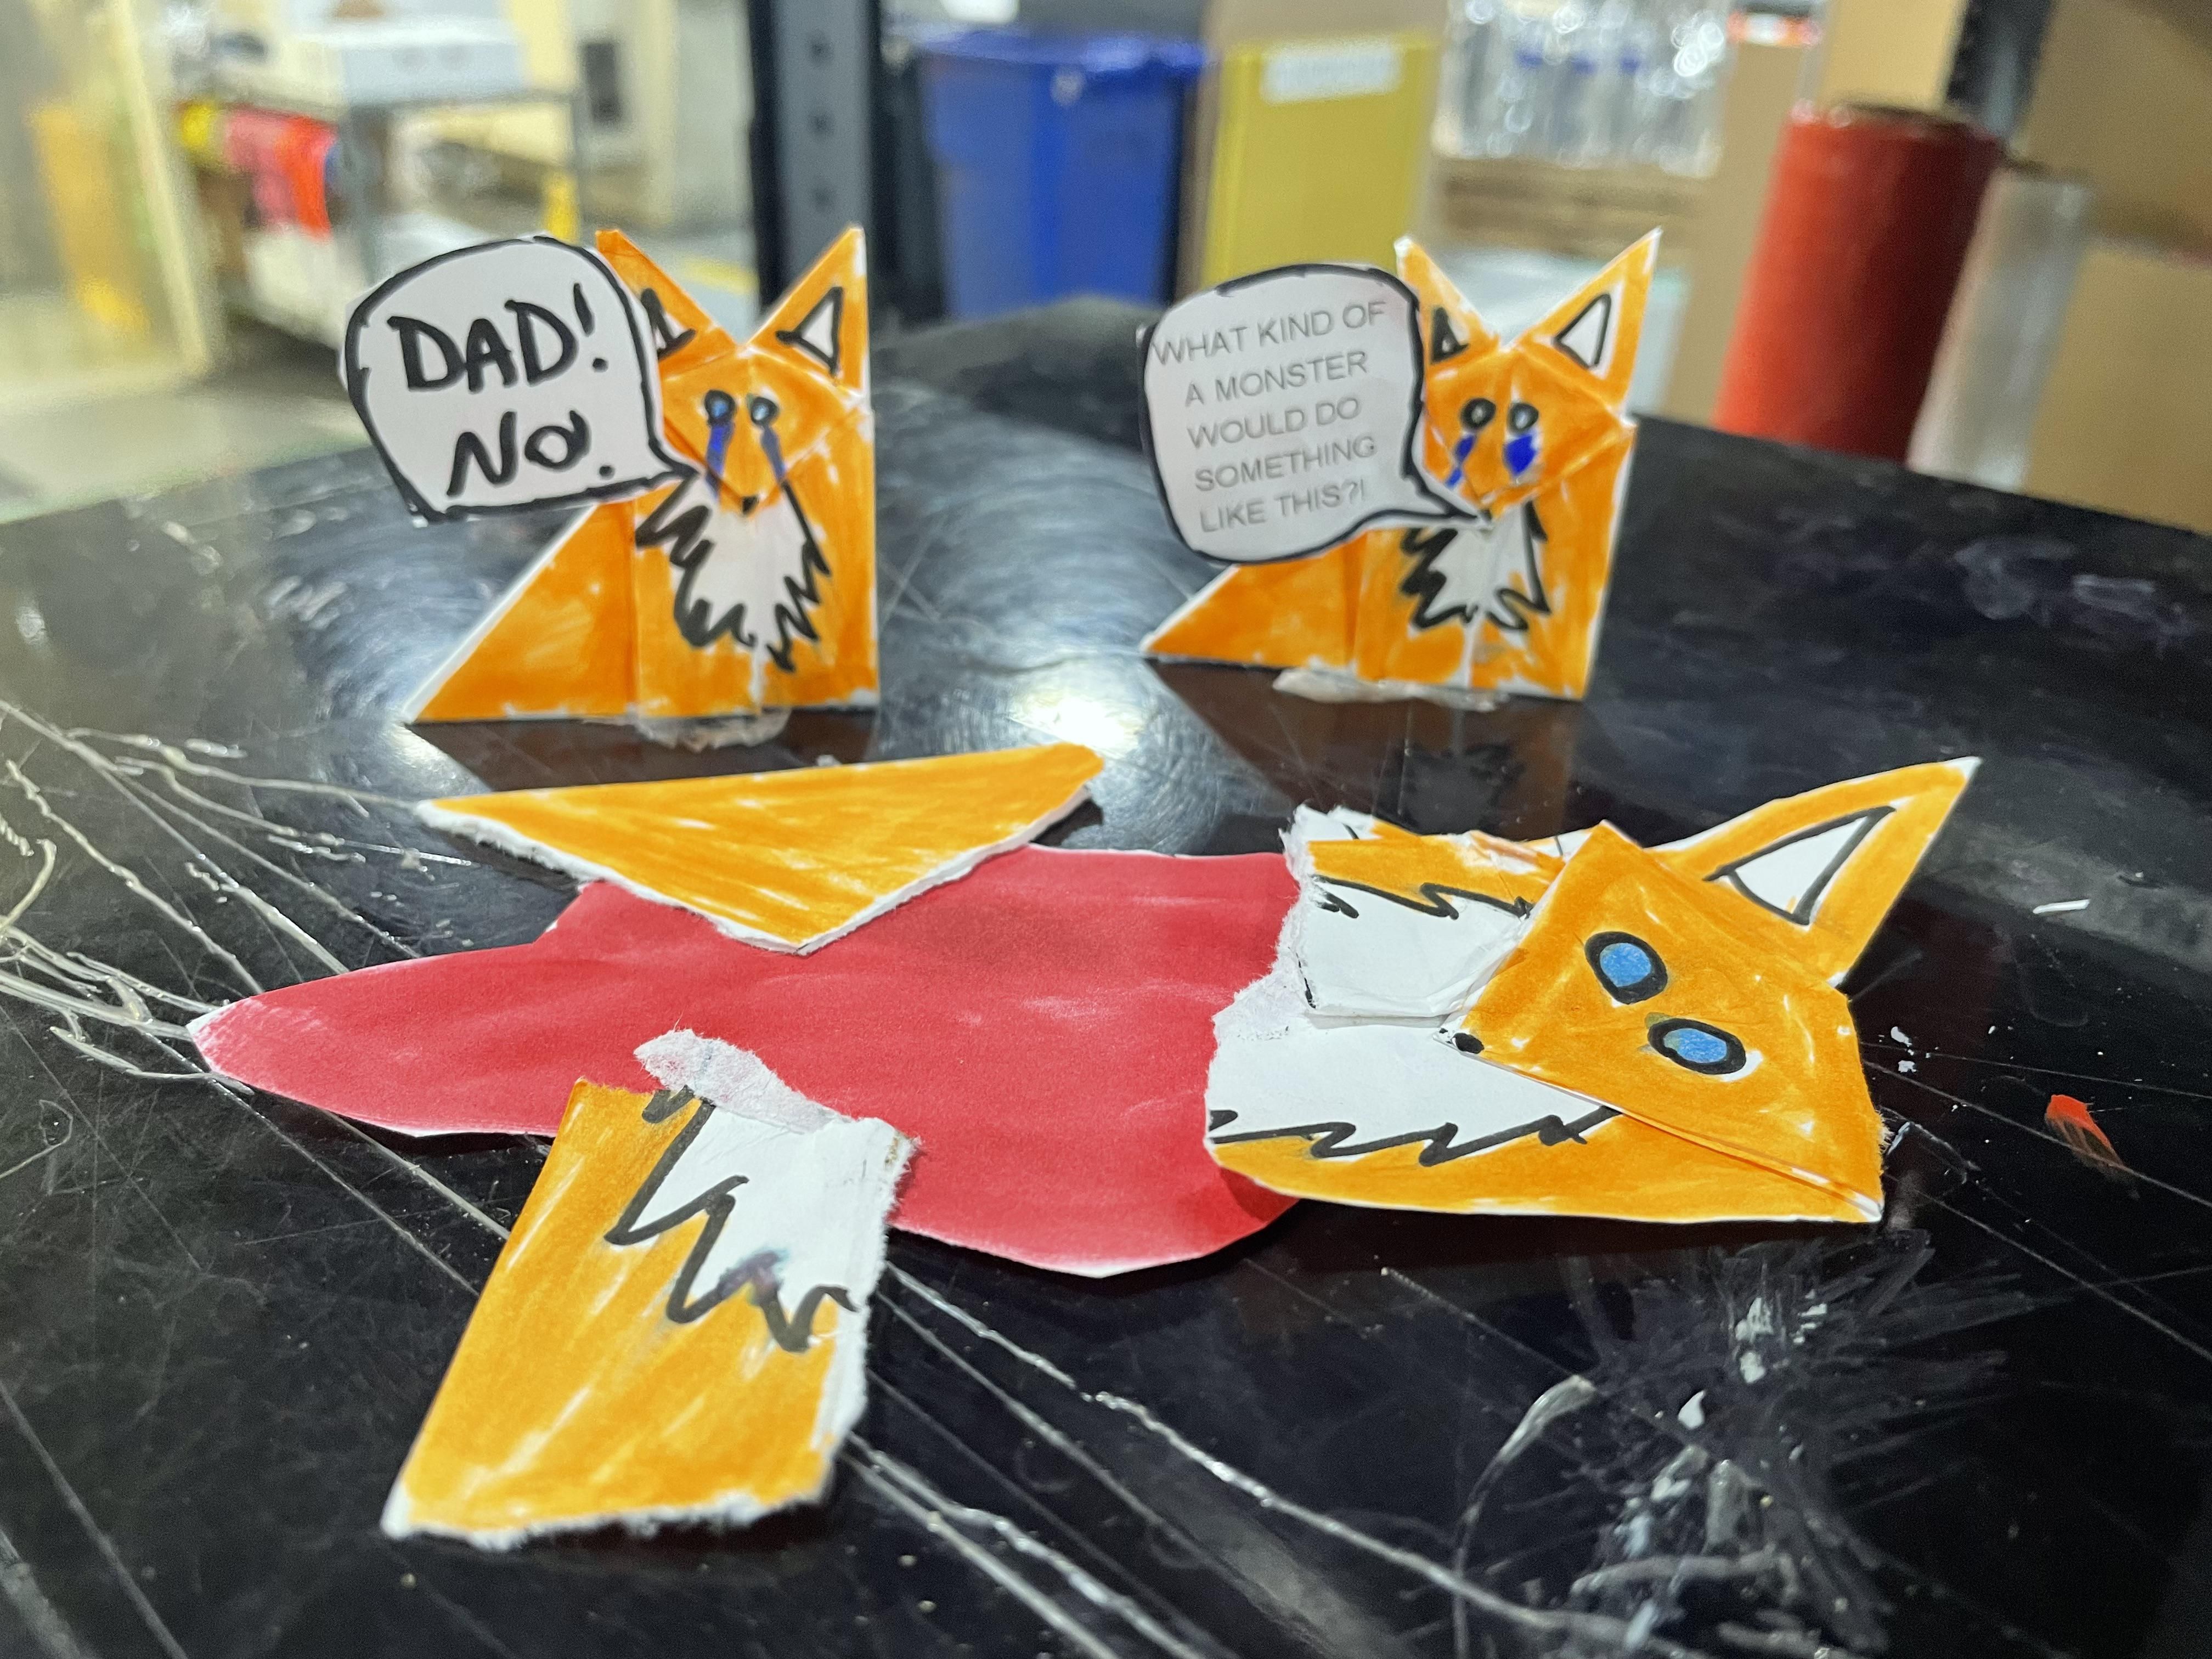 Someone suggested I post this here. Someone at work decided to rip up and destroy the origami fox I made at work. I took the opportunity to guilt them